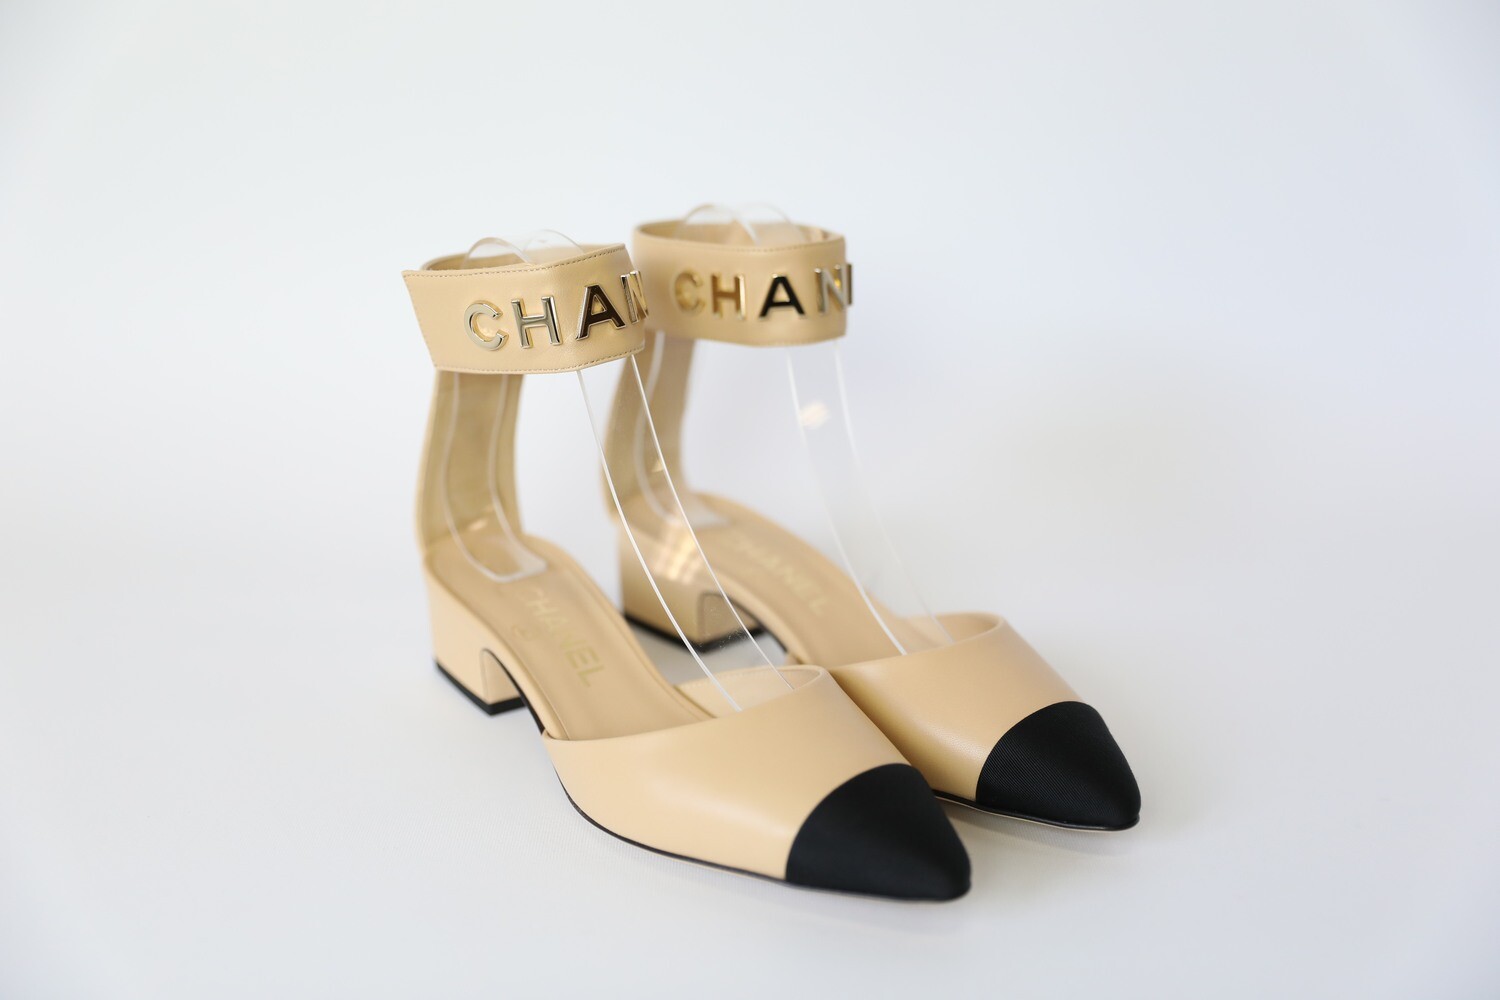 Chanel Shoes Ankle Strap Low Heels, Beige and Black, Size 36, New in Box  WA001